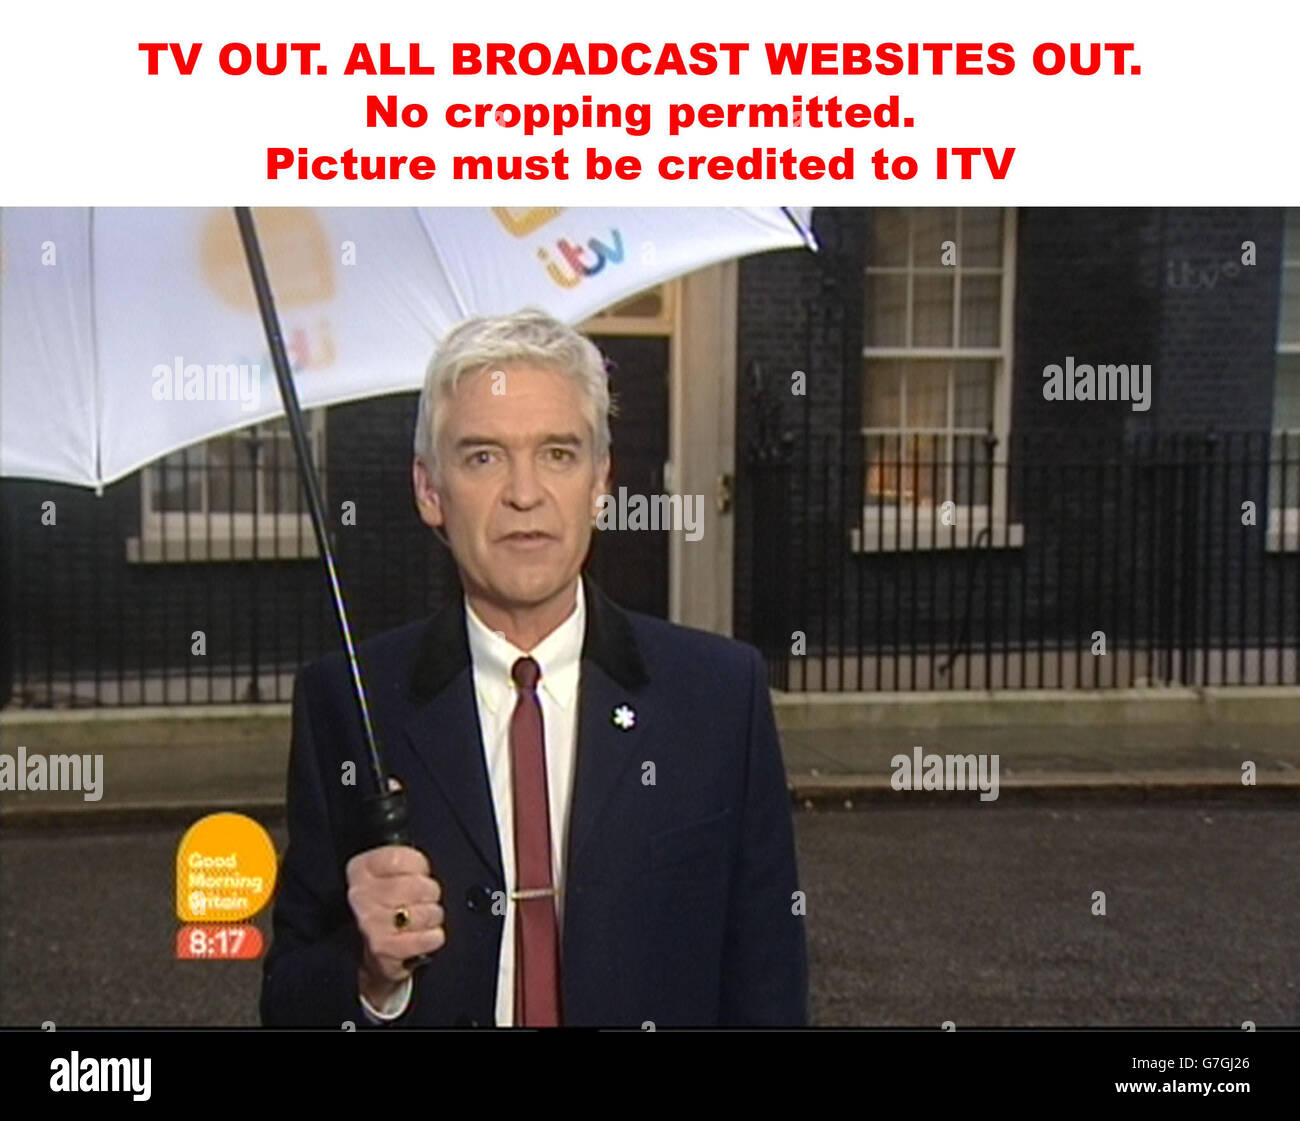 TV OUT. ALL BROADCAST WEBSITES OUT. No cropping permitted. Picture must be credited to ITV. We are advised that videograbs should not be used more than 48 hours after the time of original transmission, without the consent of the copyright holder. Video grab taken from ITV of Philip Schofield speaking from Downing Street, London, as the TV presenter attempted his his 24-hour broadcasting challenge as part of the build-up to ITV's annual Text Santa fundraiser this month. Stock Photo